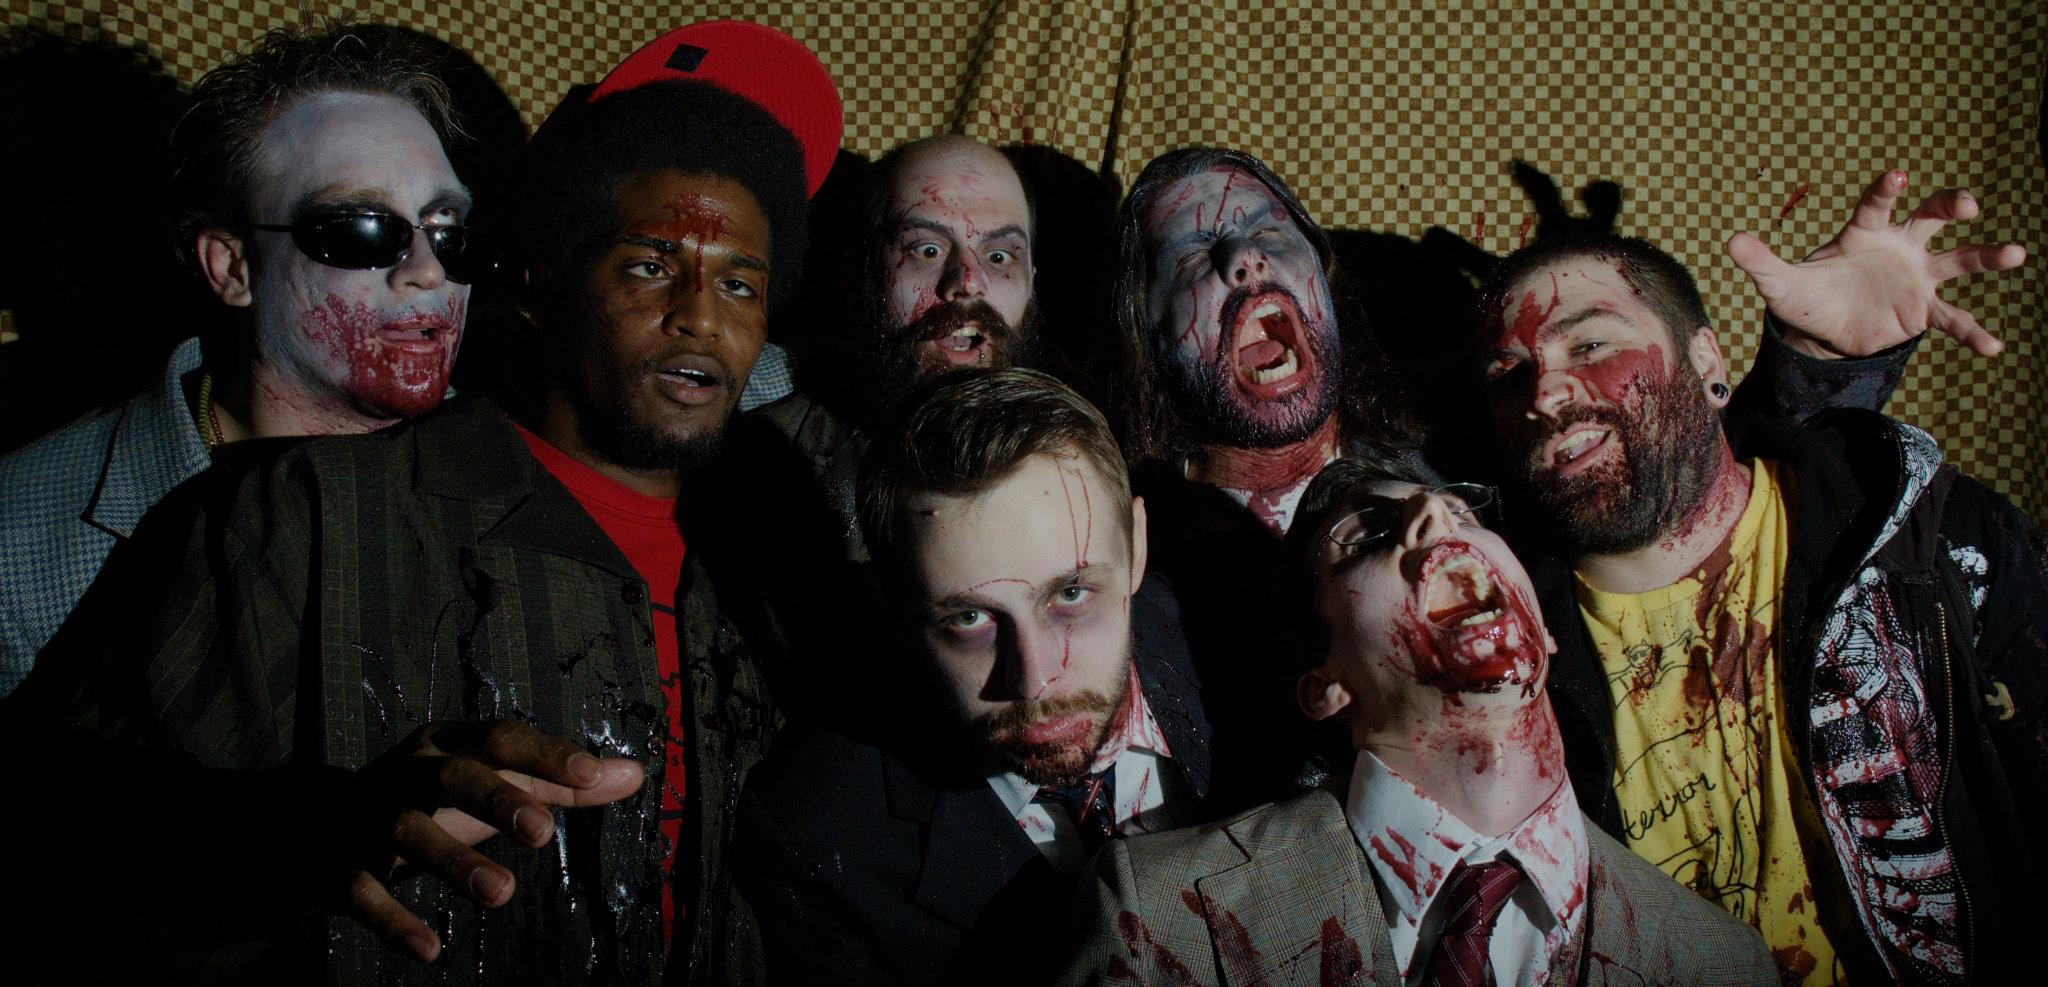 Zombies at the 2nd Annual Black Hearts Ball, 2012 [courtesy Brian Williams]